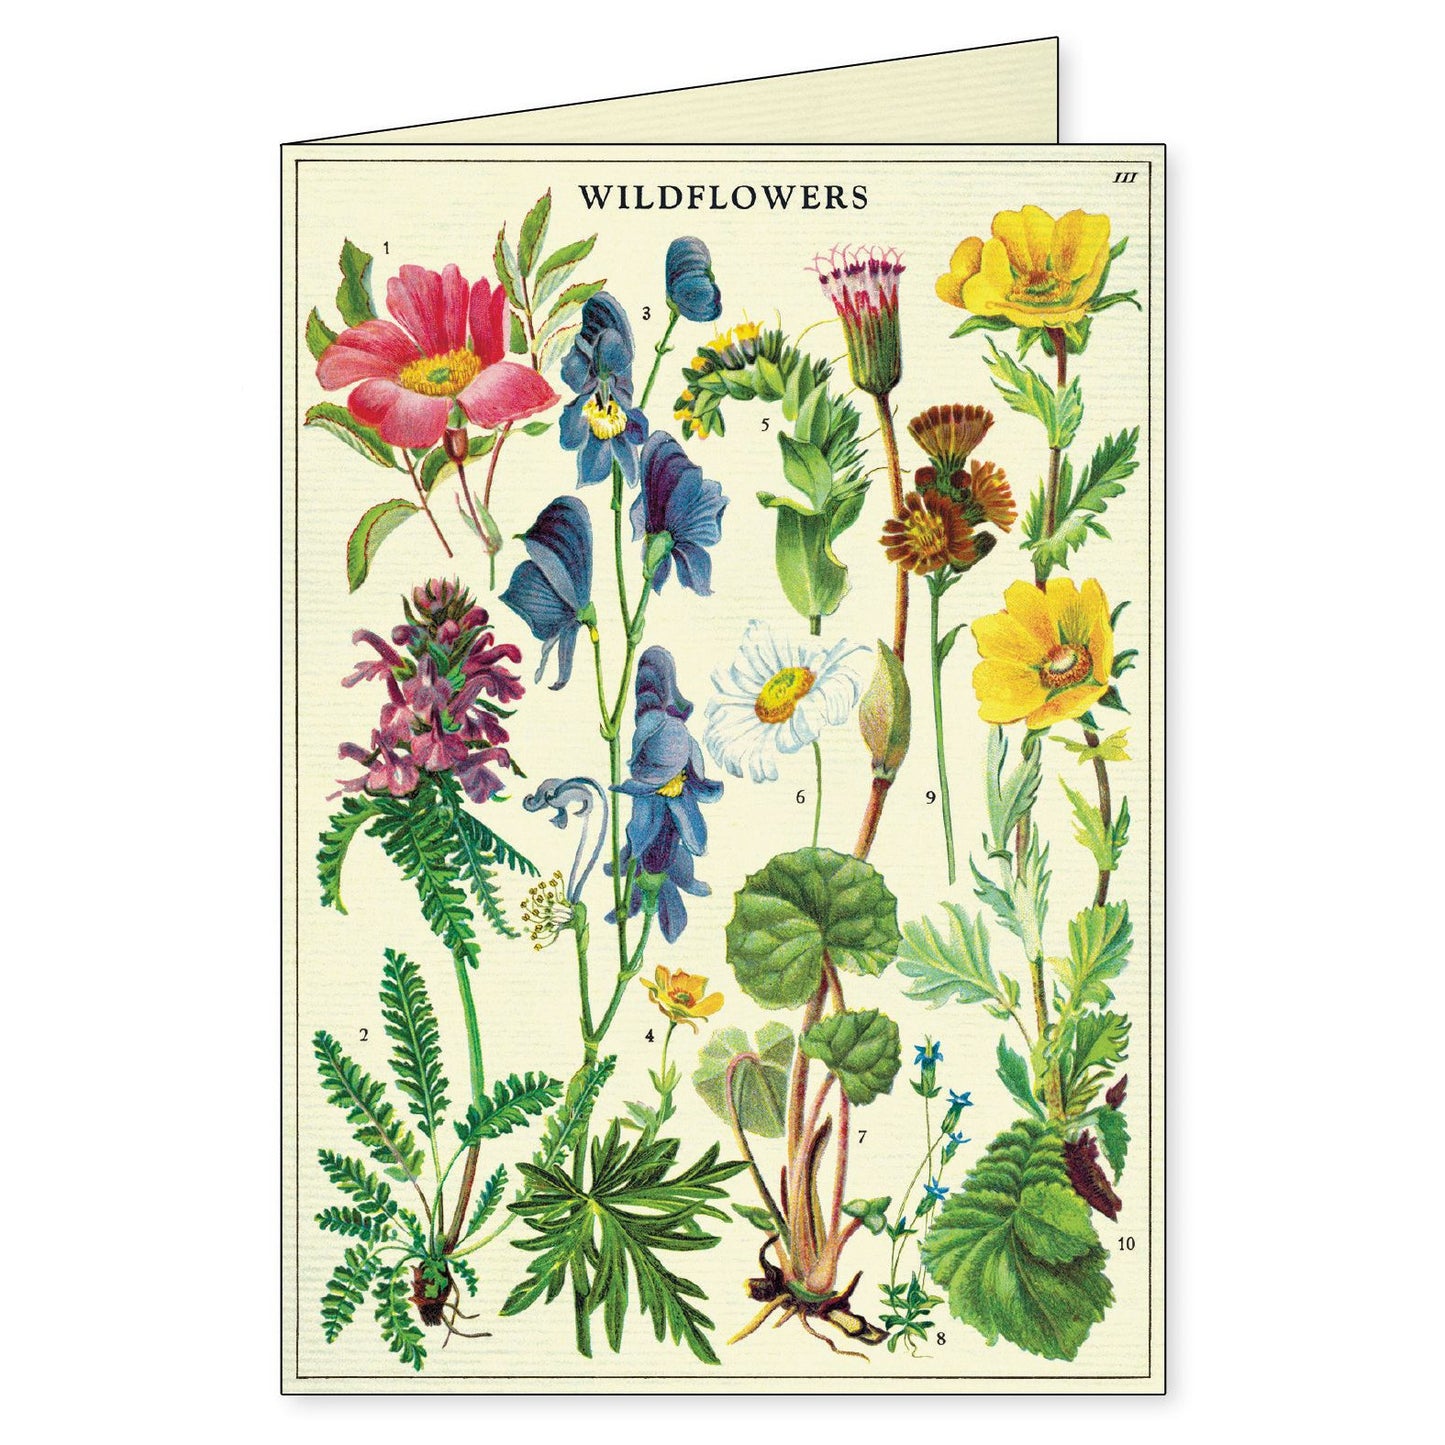 Cavallini & Co. Boxed Note Cards - Wildflowers